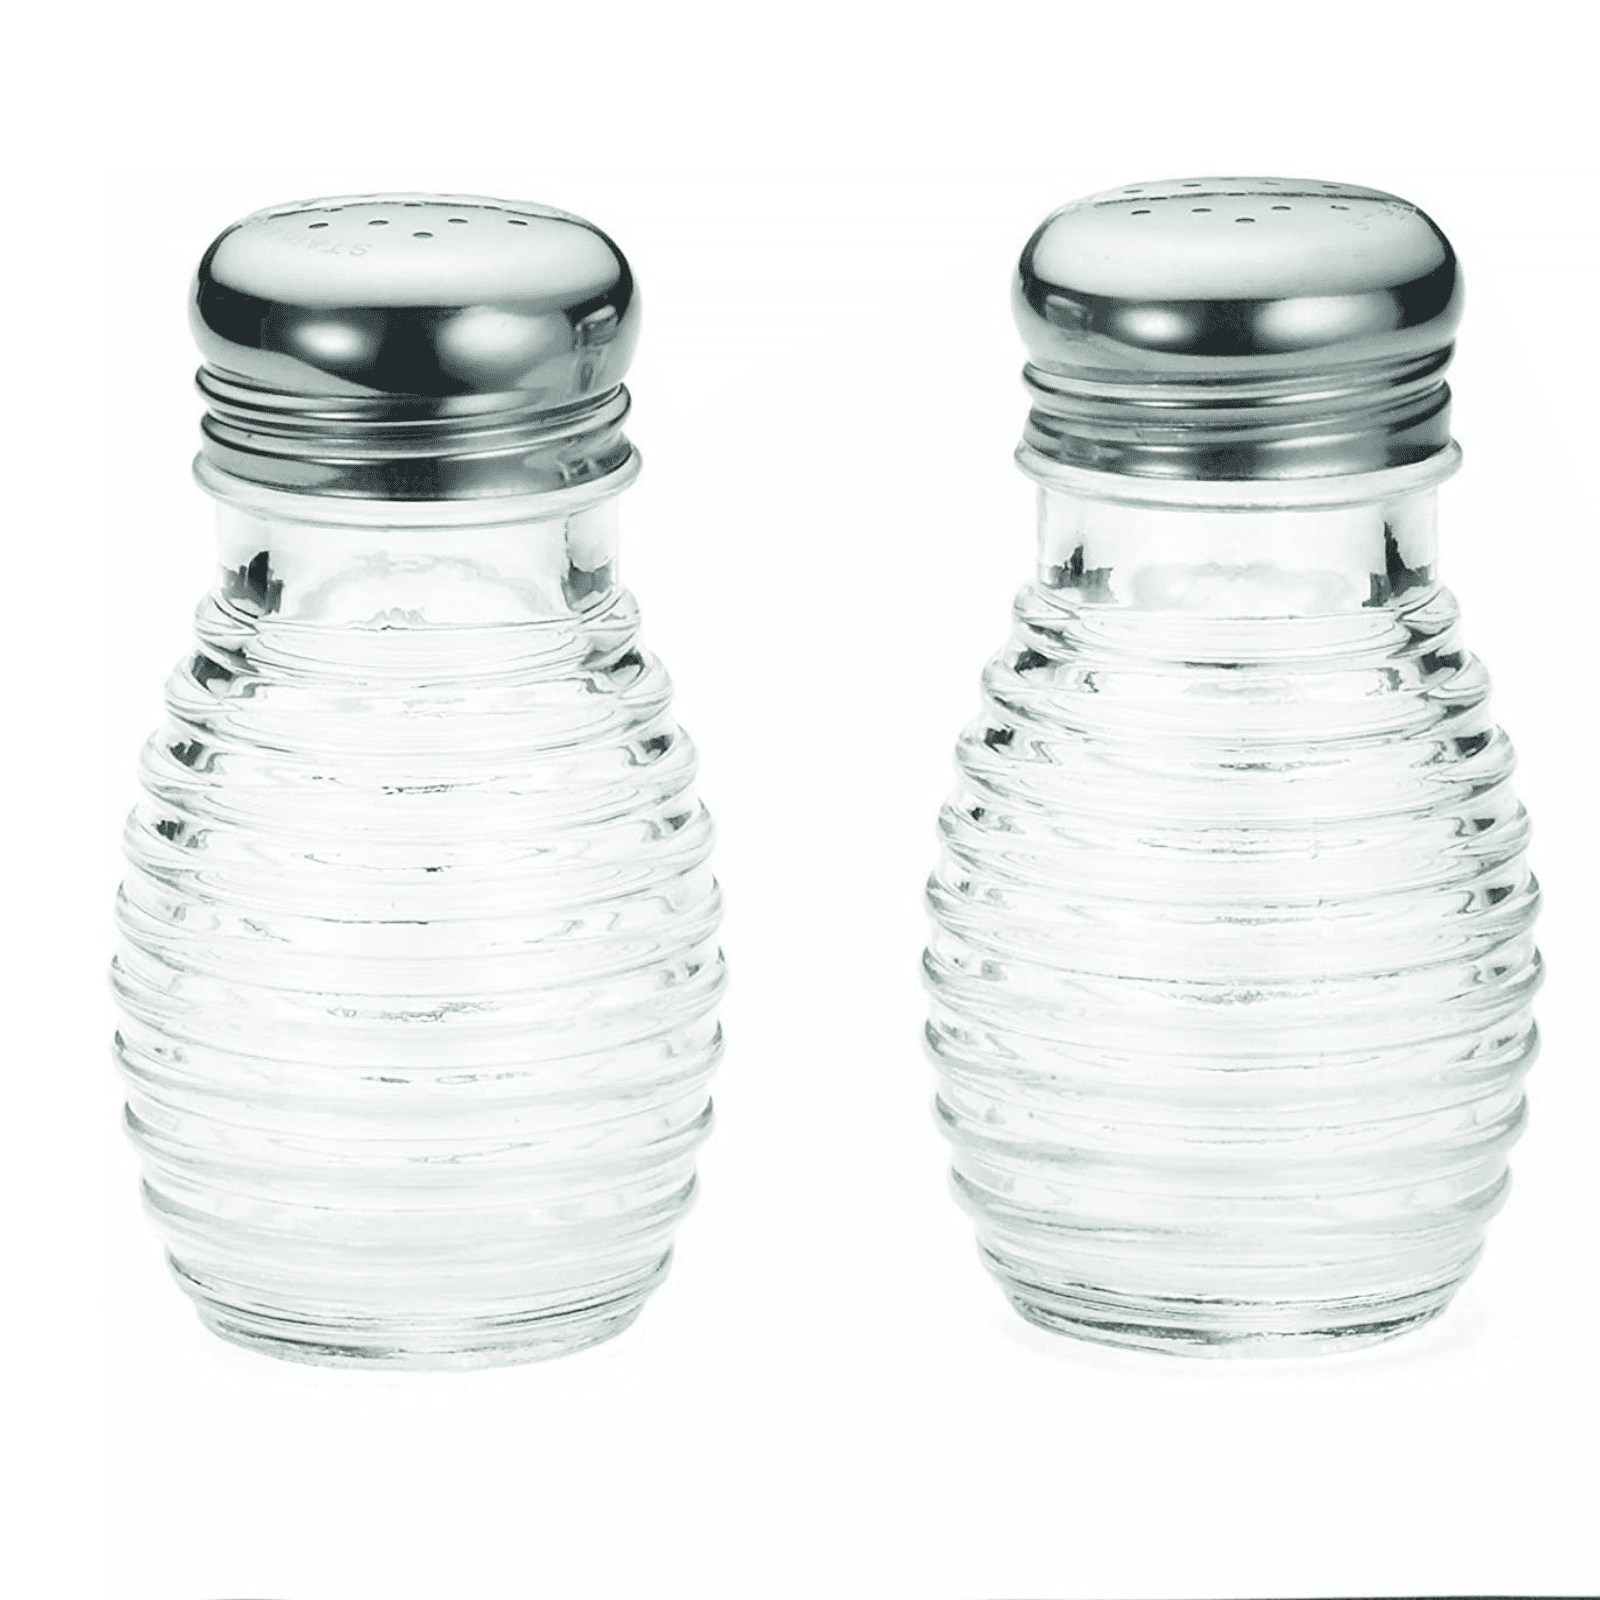 Textured Glass Salt and Pepper Shakers Vintage-Retro Style Stainless Steel Lids 